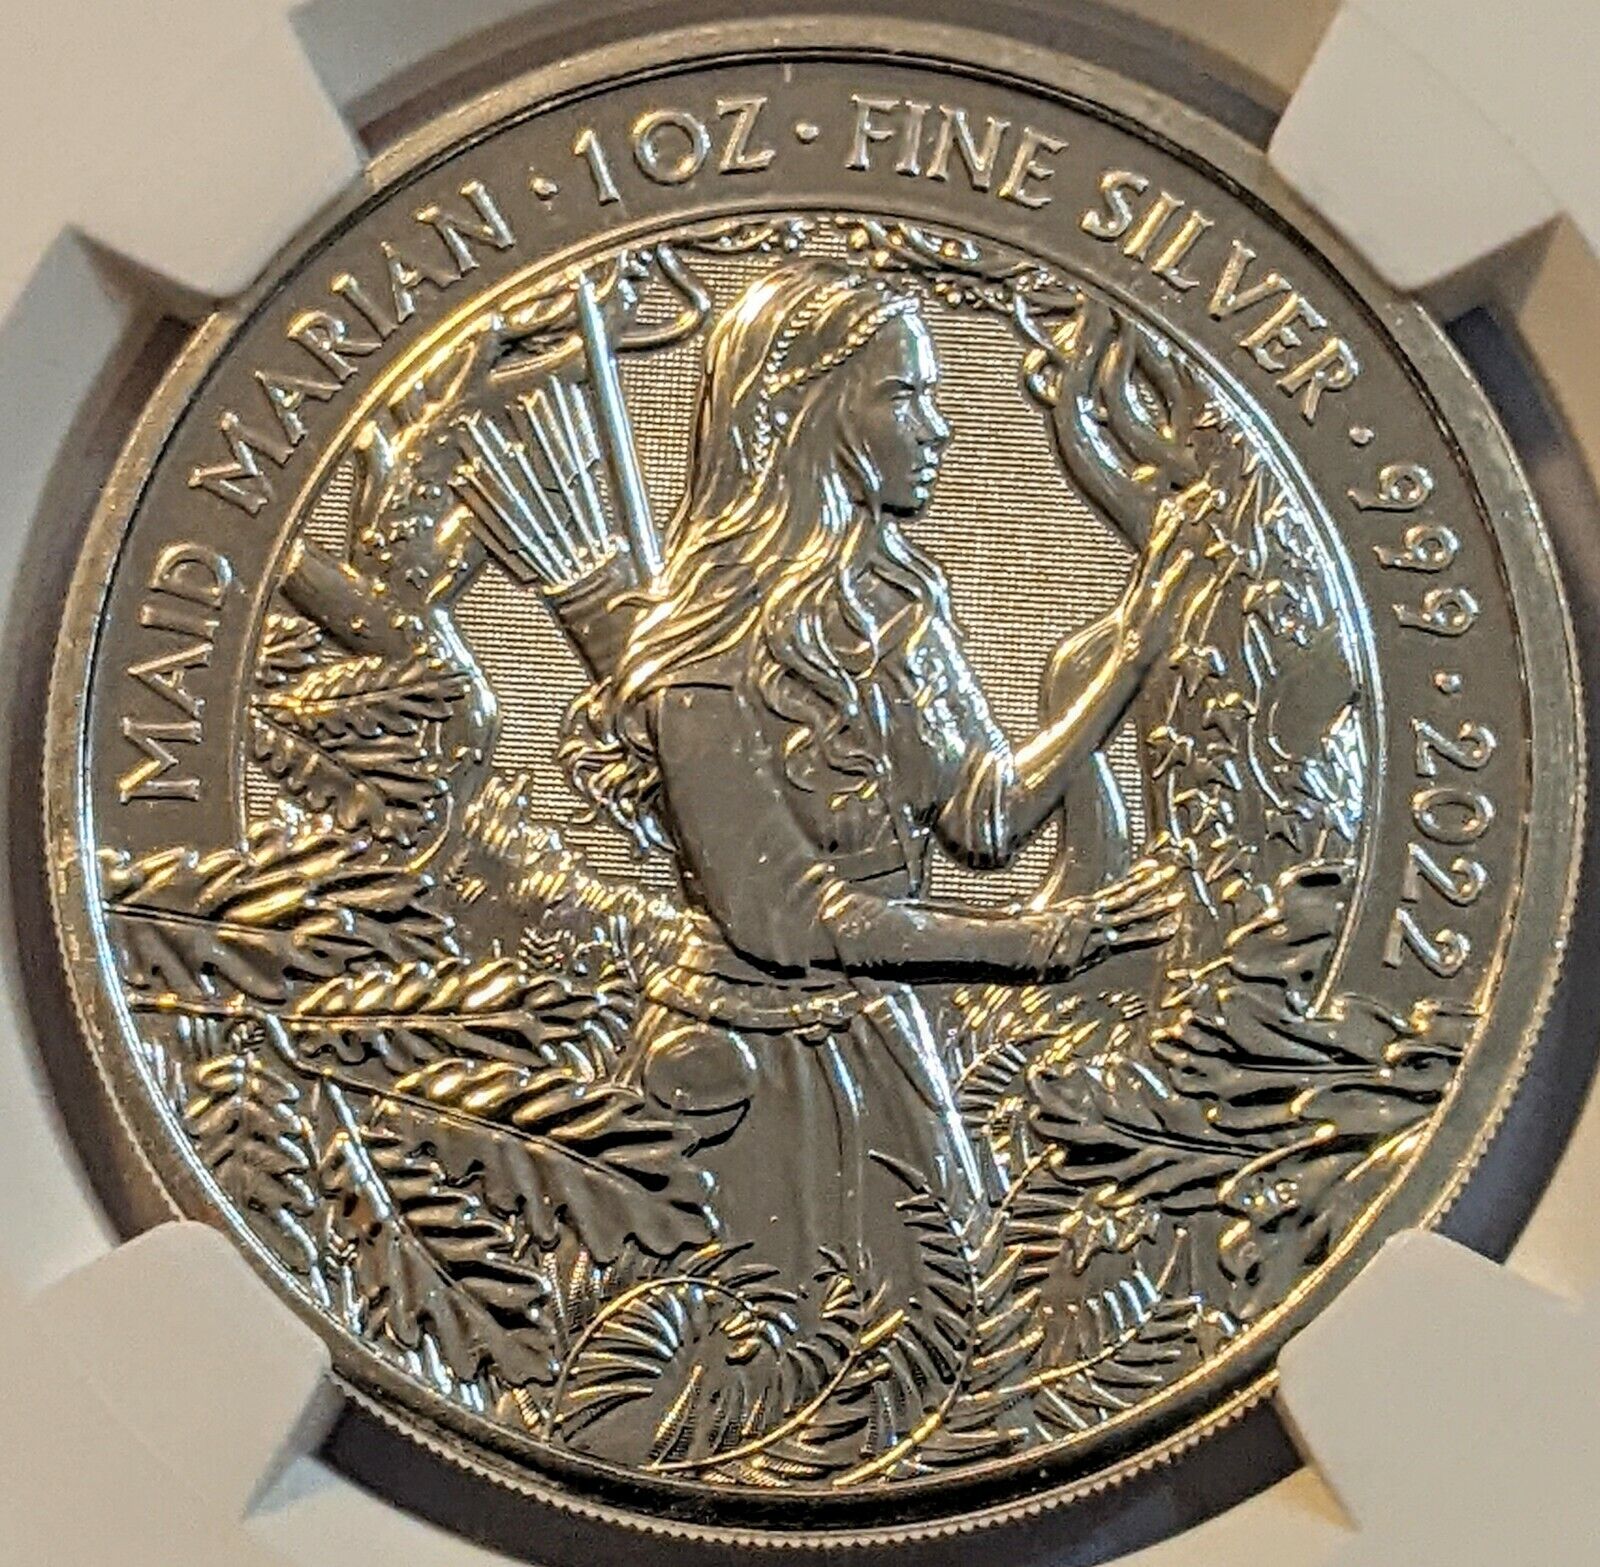 2022 GREAT BRITAIN MAID MARIAN 1 oz £2 MS68 Price reduction NGC SILVER Max 62% OFF GRAD HIGH